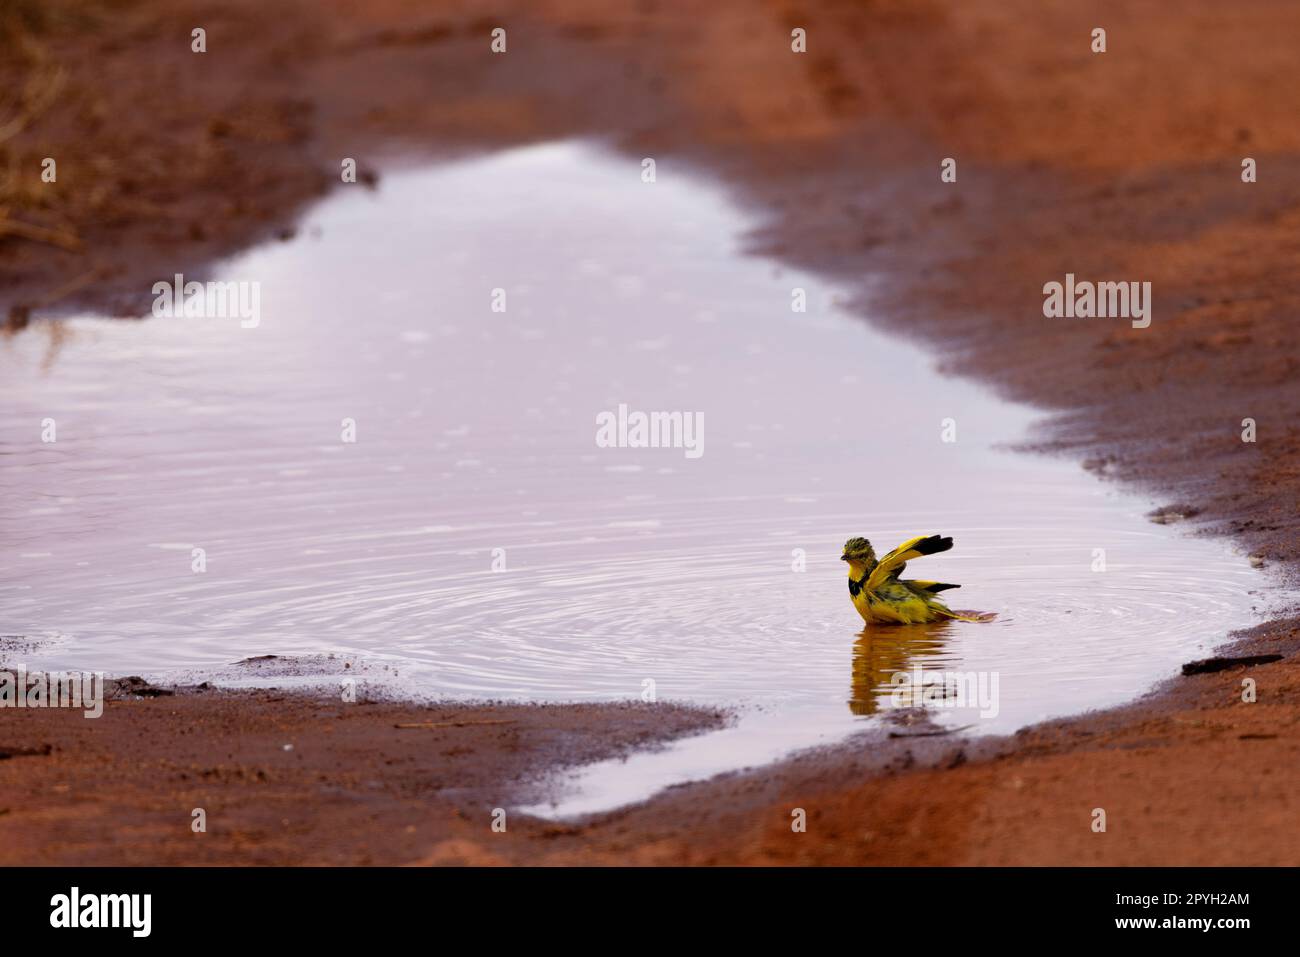 This stunning photo captures the Bokmakiere Bird in the midst of a refreshing bath in a puddle on the Kenyan savannah. The bird's feathers are fluffed Stock Photo